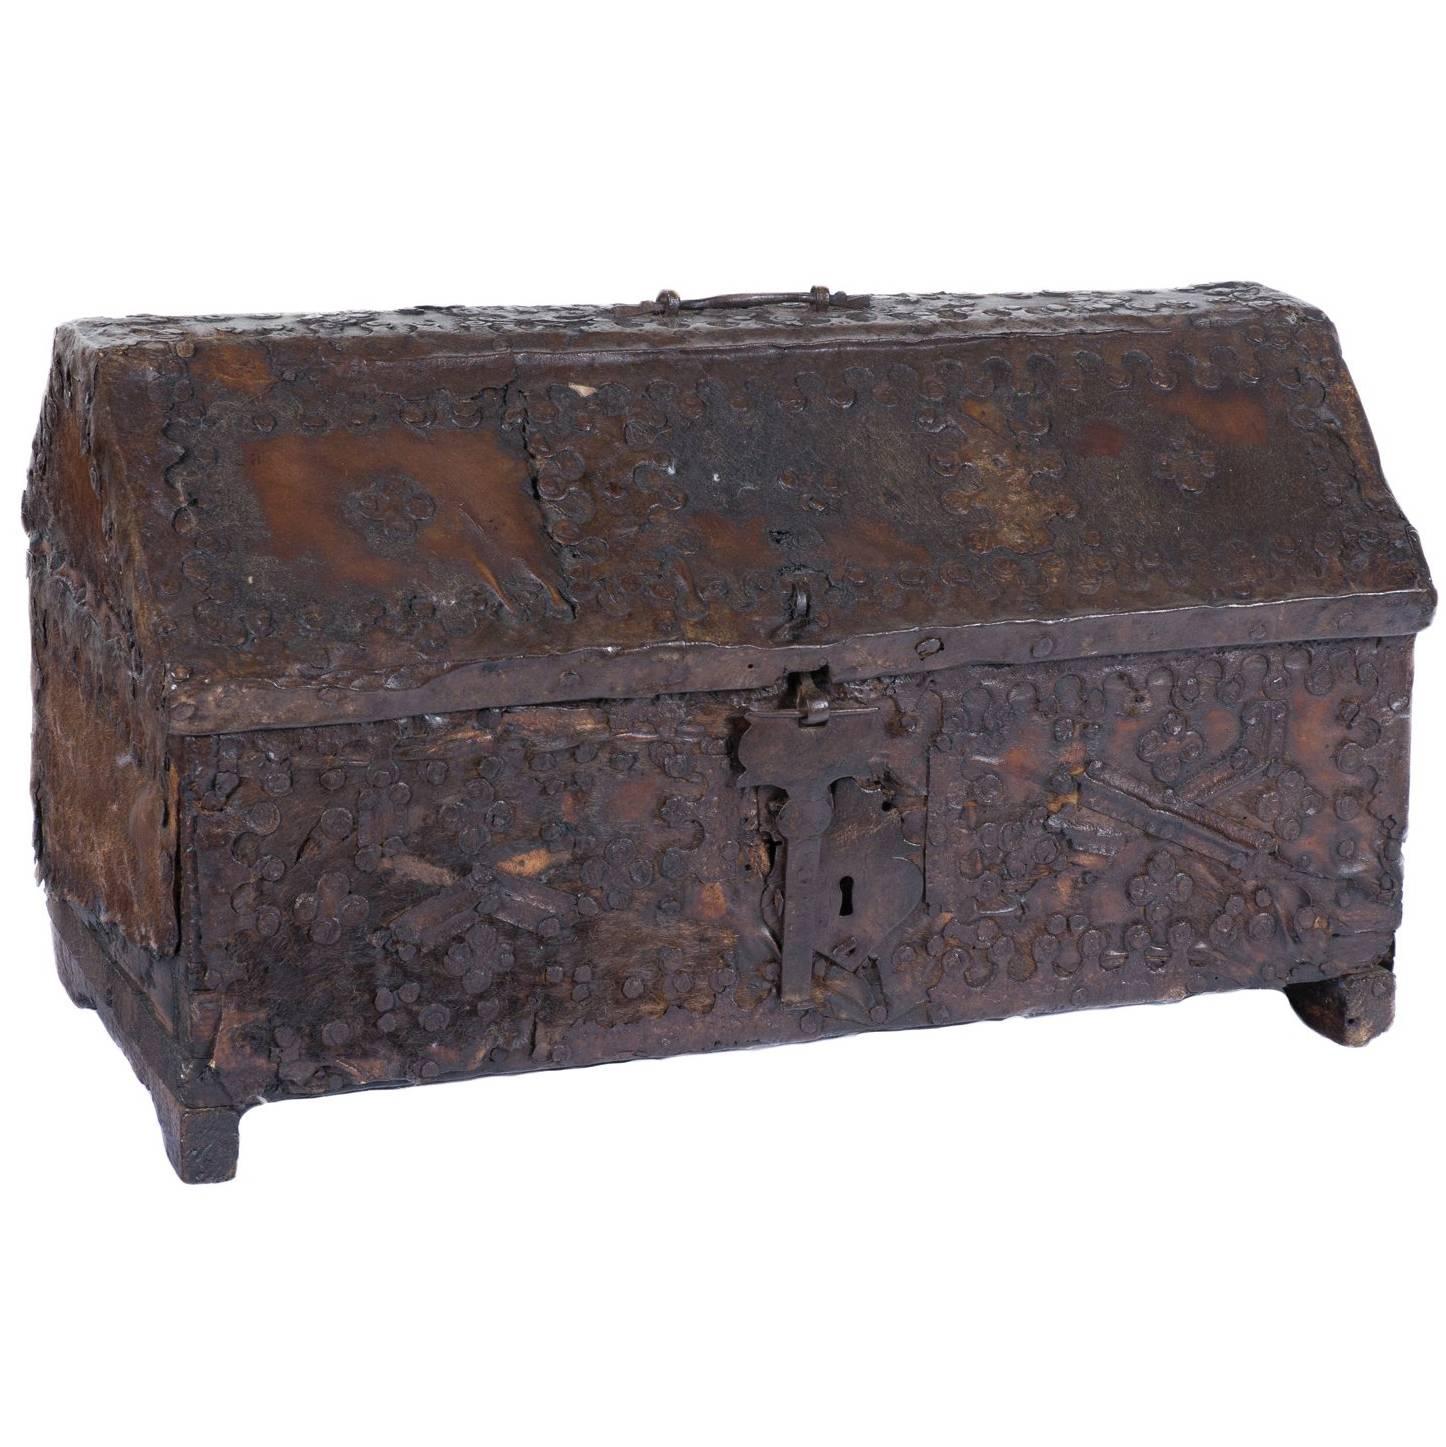 16th Century Spanish Leather and Wood Box with Ironwork For Sale